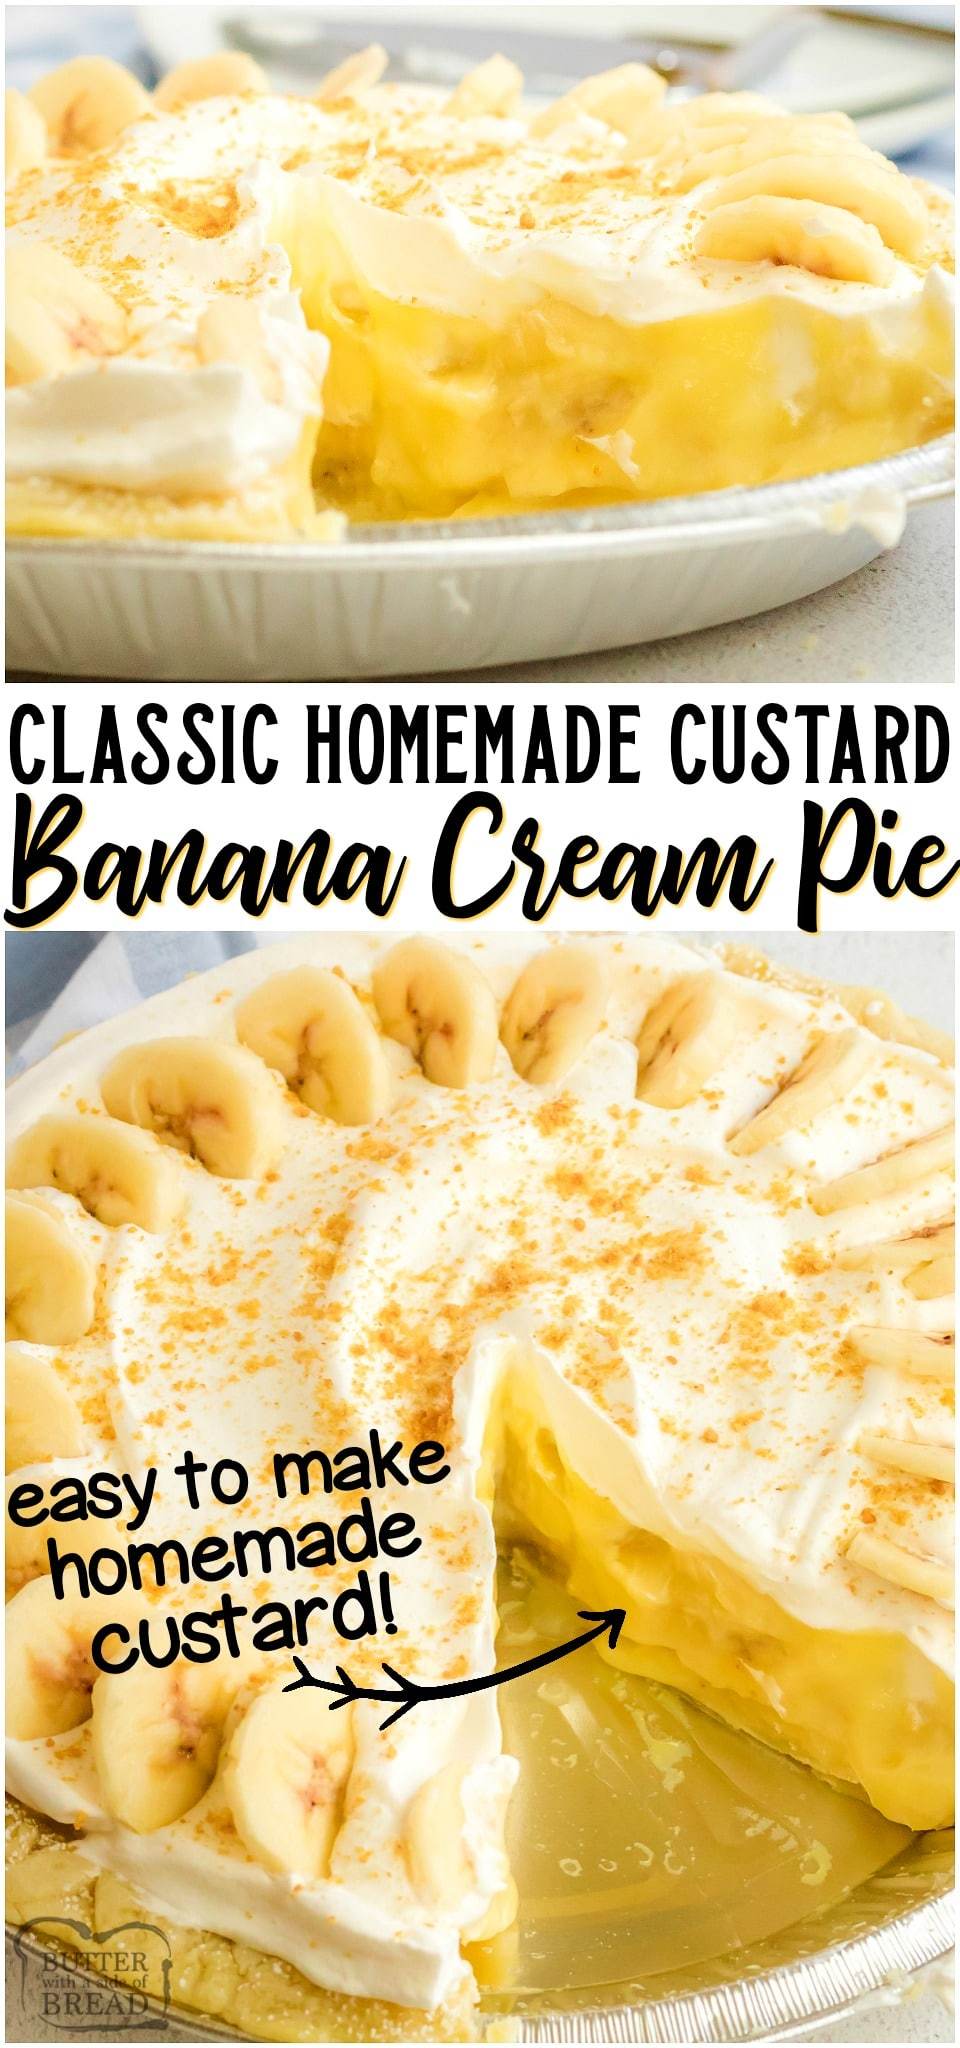 Homemade Banana Cream Pie is a classic! Creamy custard filling with sliced bananas all inside a flaky pie crust. Making a Banana Cream Pie recipe from scratch is easier than you think! #pie #banana #bananacream #dessert #baking #holidays #creampie #recipe from BUTTER WITH A SIDE OF BREAD